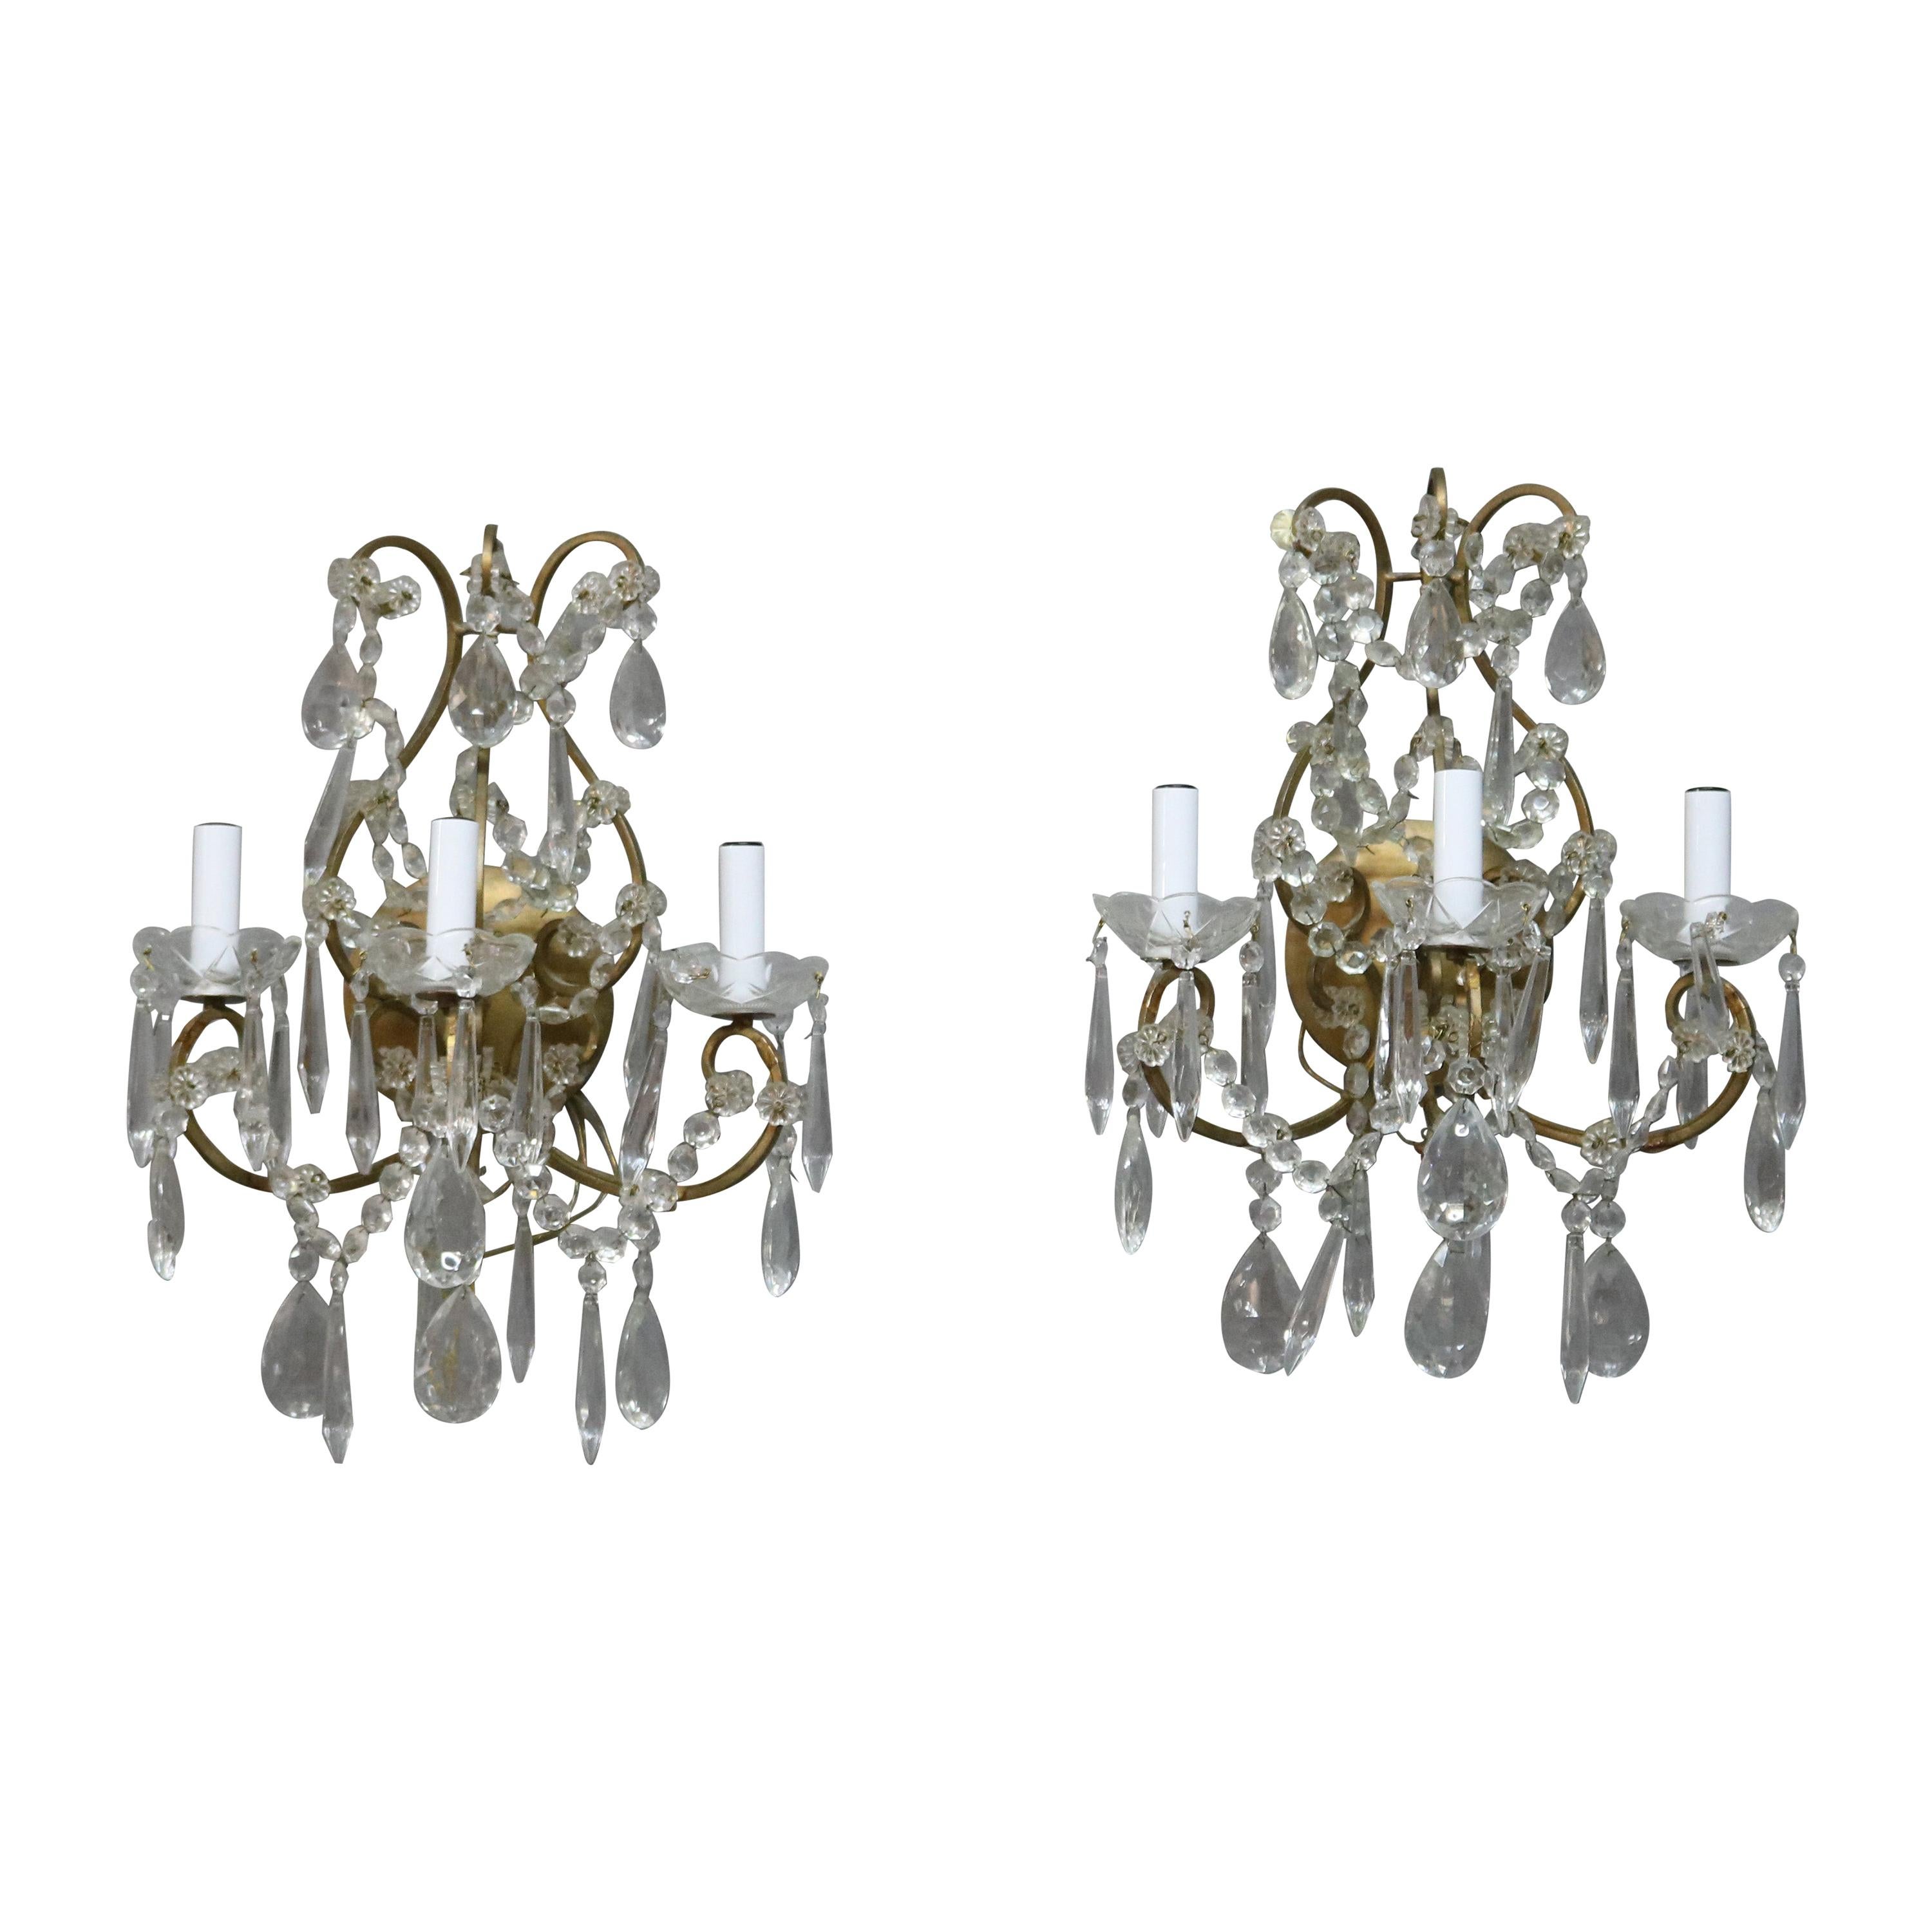 Pair of French Style Brass and Crystal Wall Sconces, circa 1940